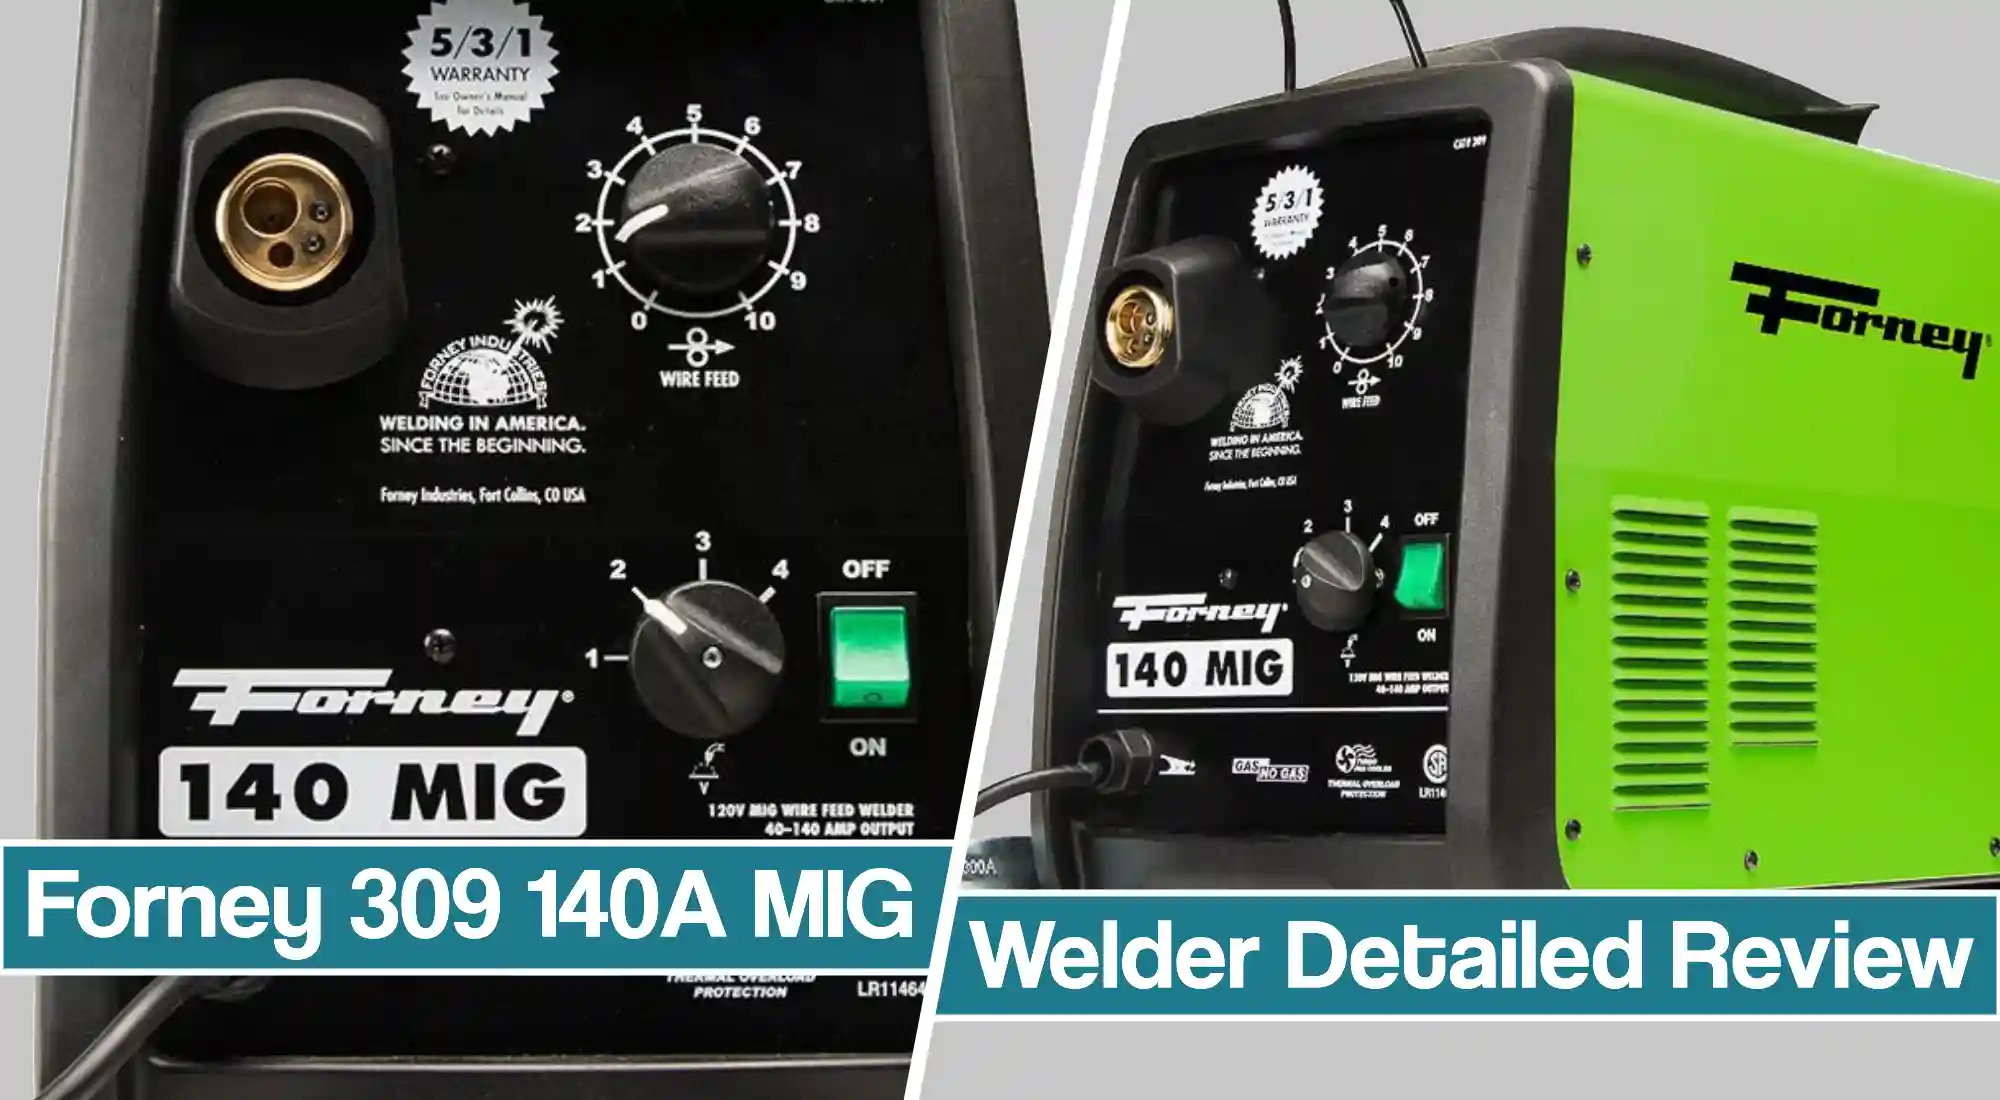 Forney 309 140-amp MIG review – Detailed Overview of This Entry-level MIG welder